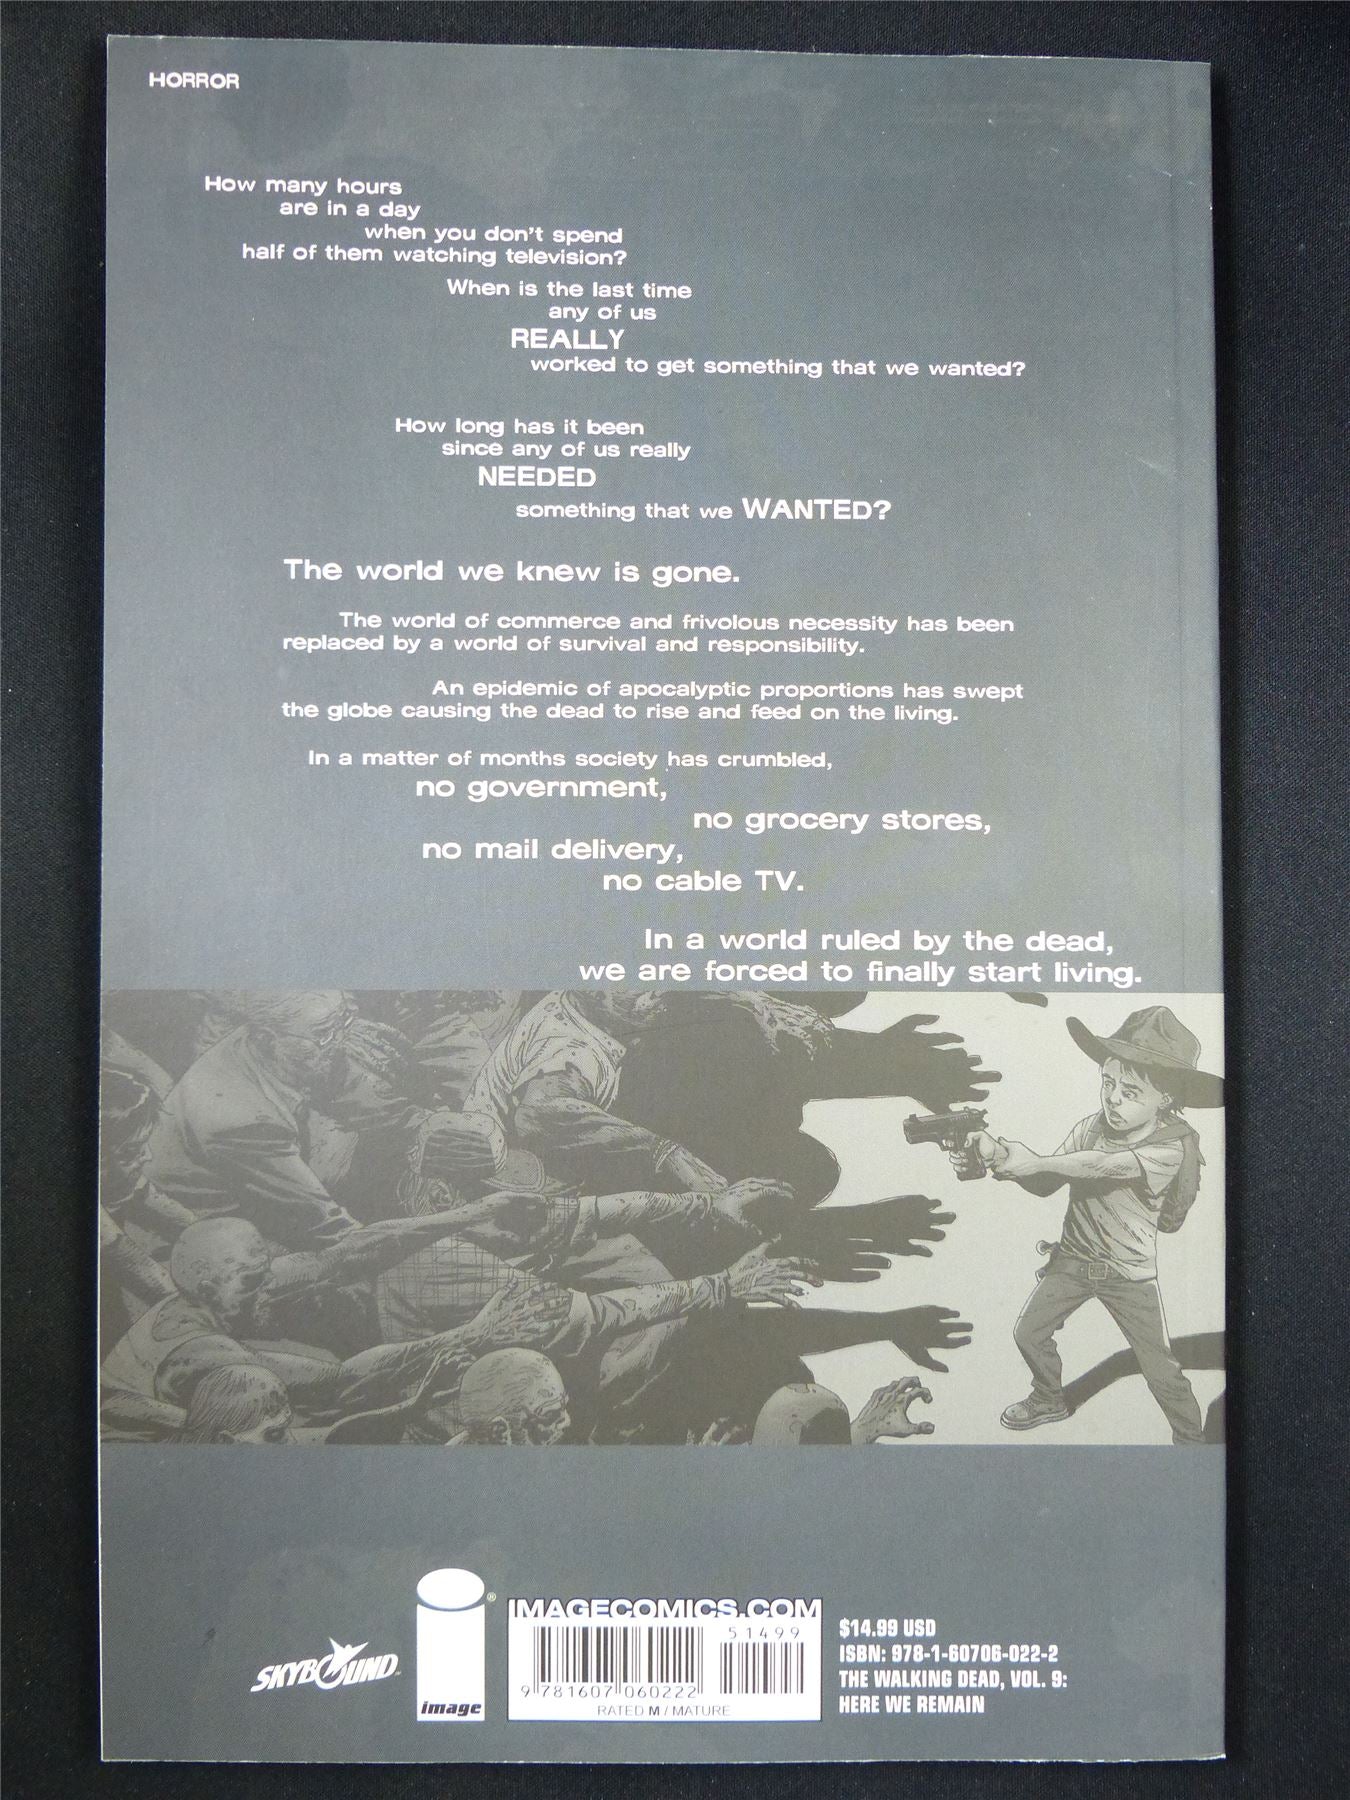 The WALKING Dead Volume 9: Here We Remain - Image Graphic Softback #1DZ